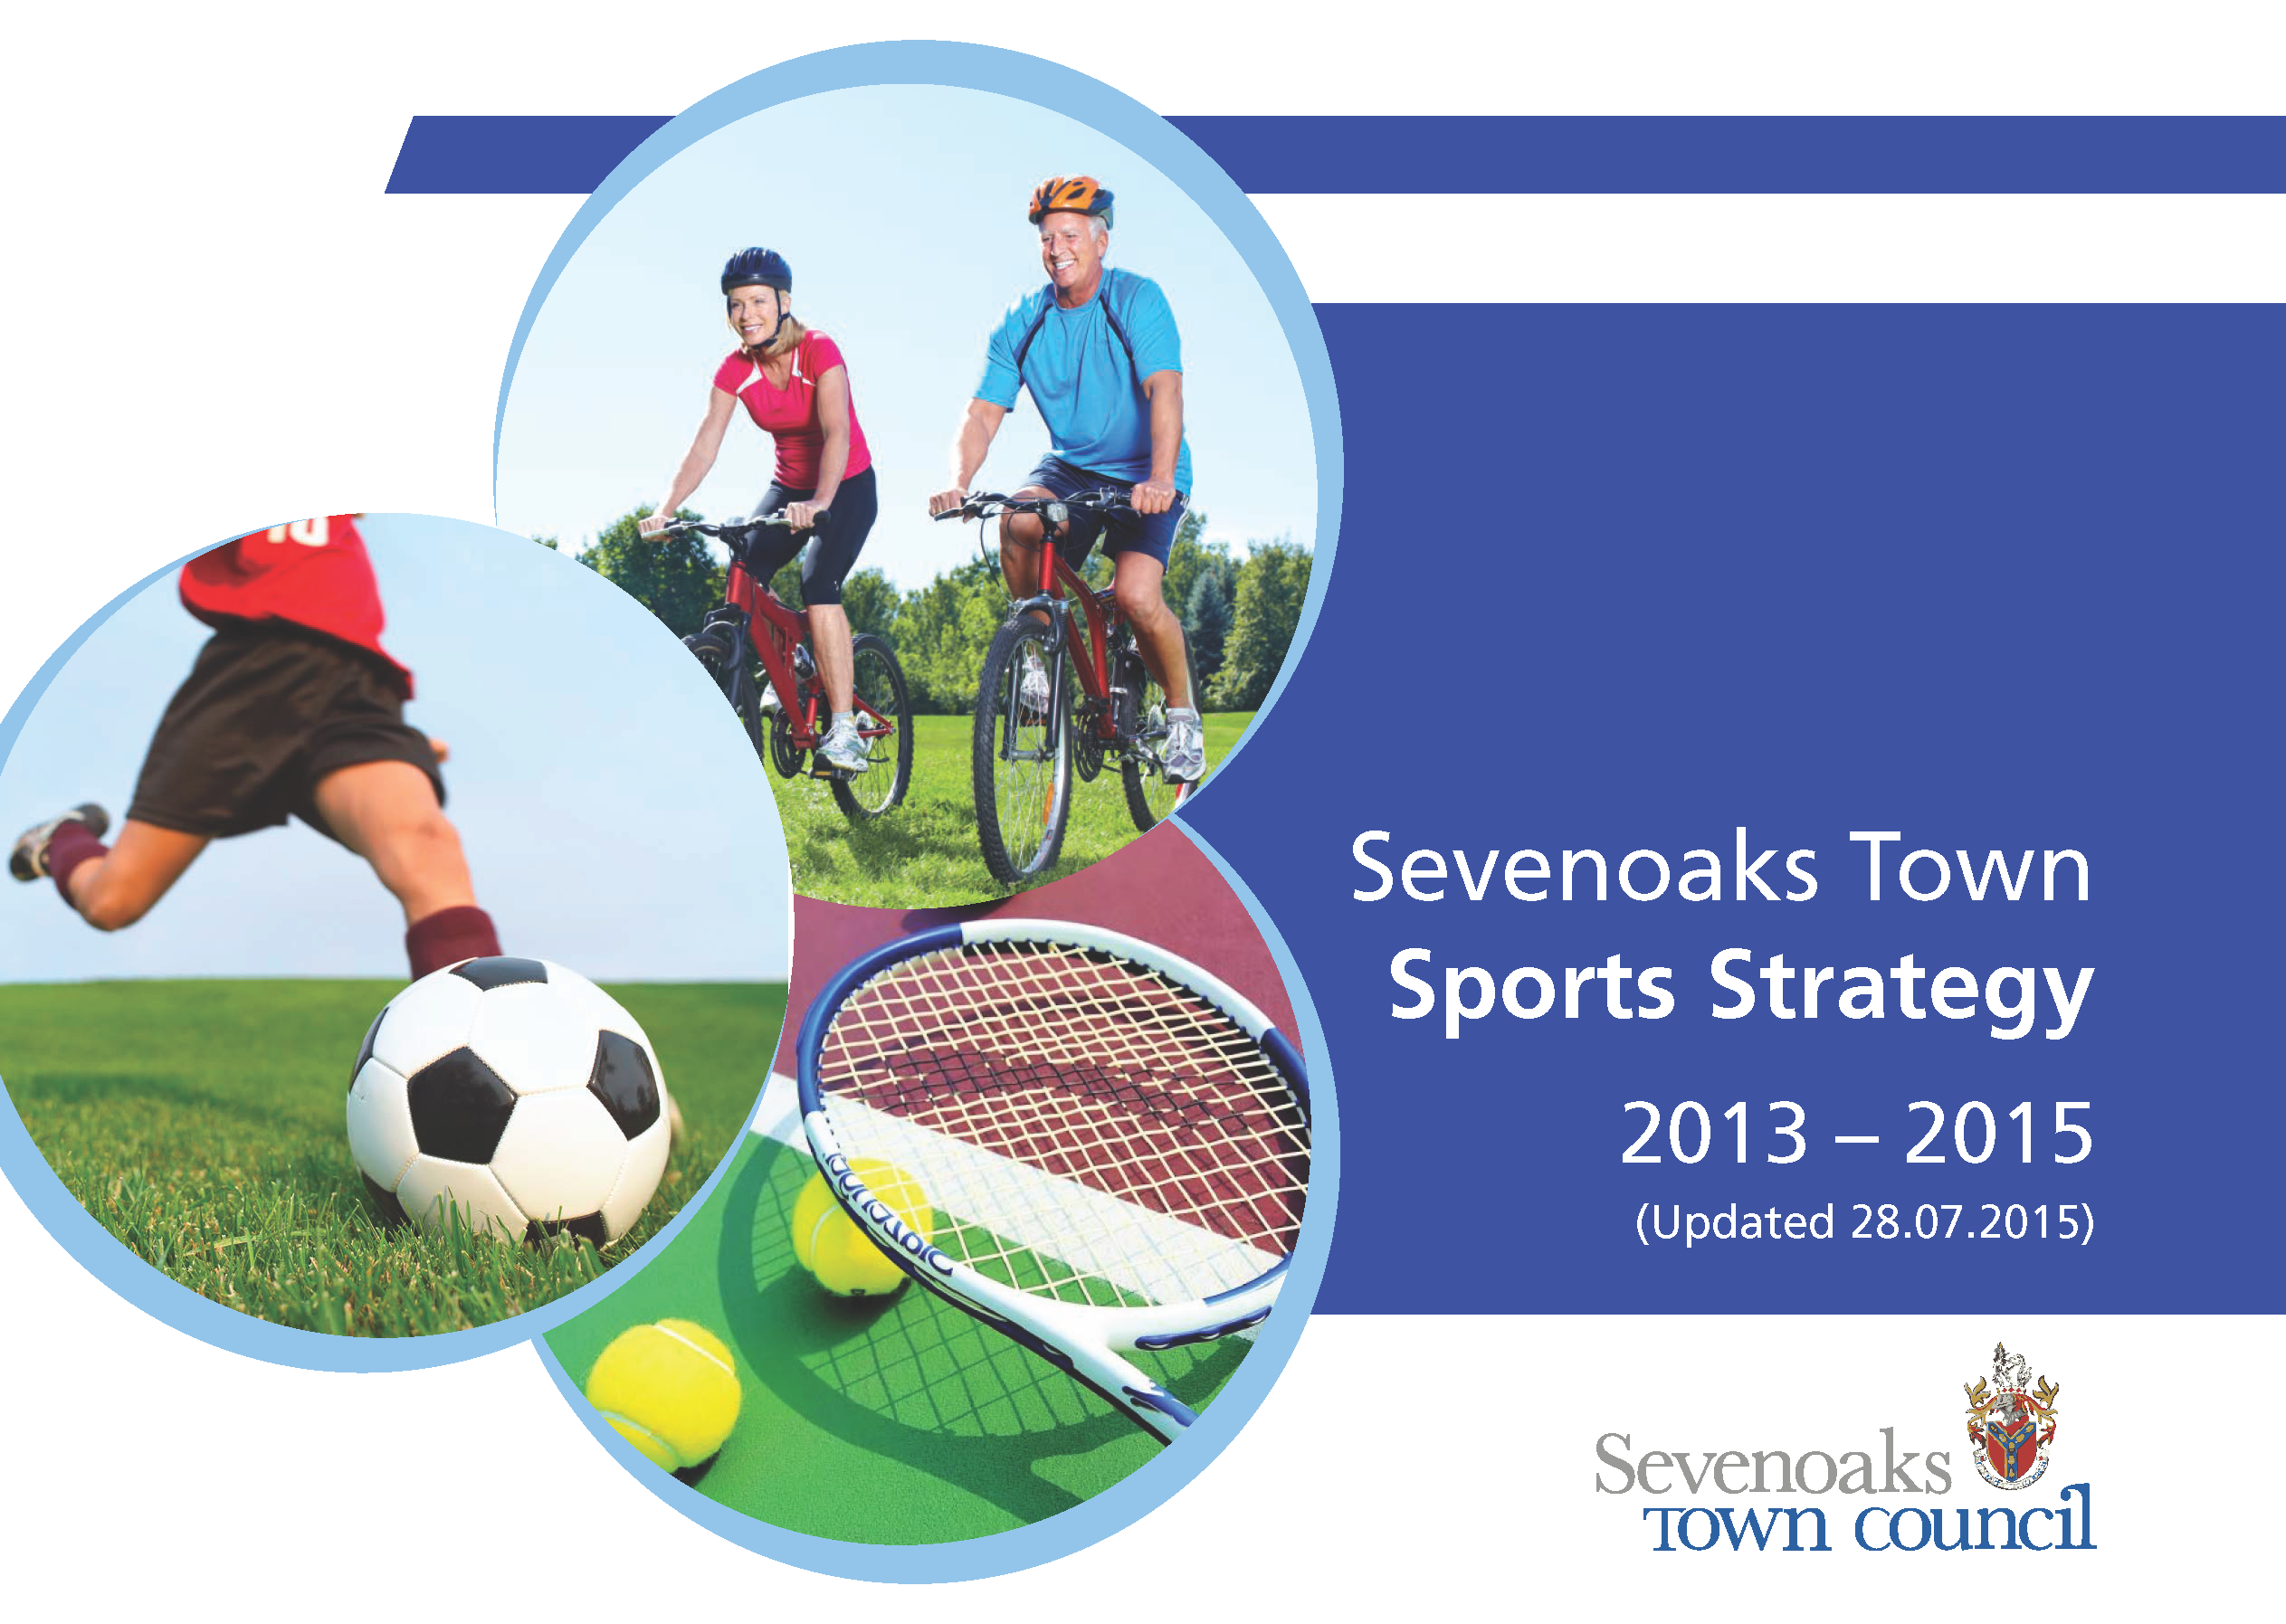 SEVENOAKS TOWN NEIGHBOURHOOD PLAN – CALL TO LOCAL SPORTING ORGANISATIONS WHO WANT TO BE INVOLVED IN UPDATING THE SEVENOAKS TOWN SPORTS STRATEGY